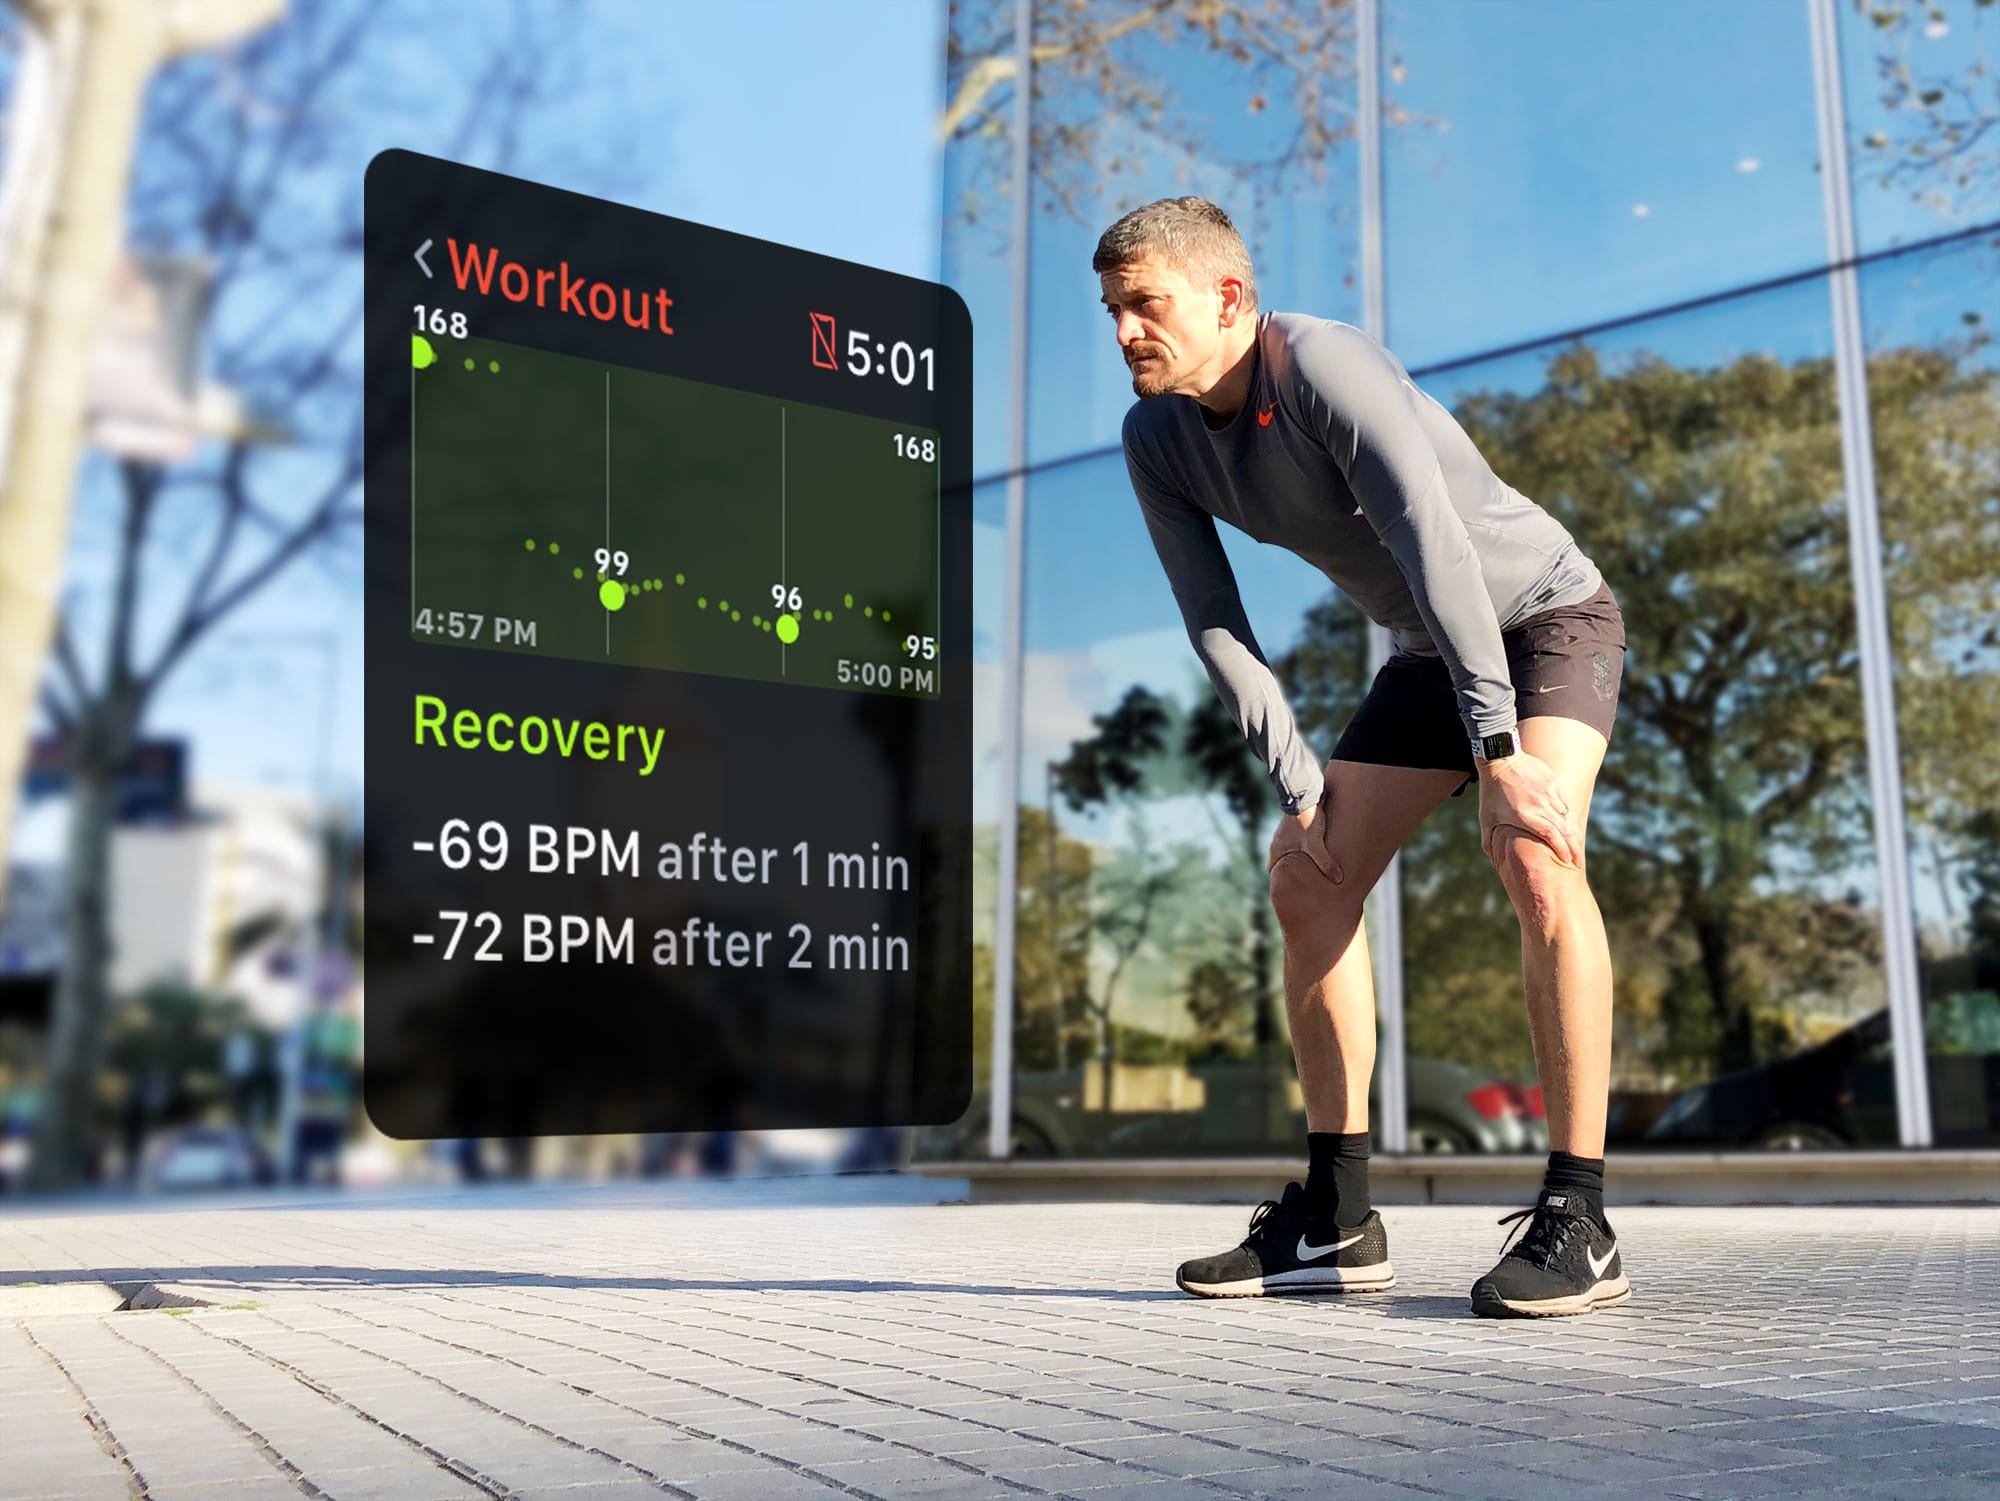 It’s not about how far you run, it’s how fast you recover. Apple Watch heart rate recovery data gives you the facts.